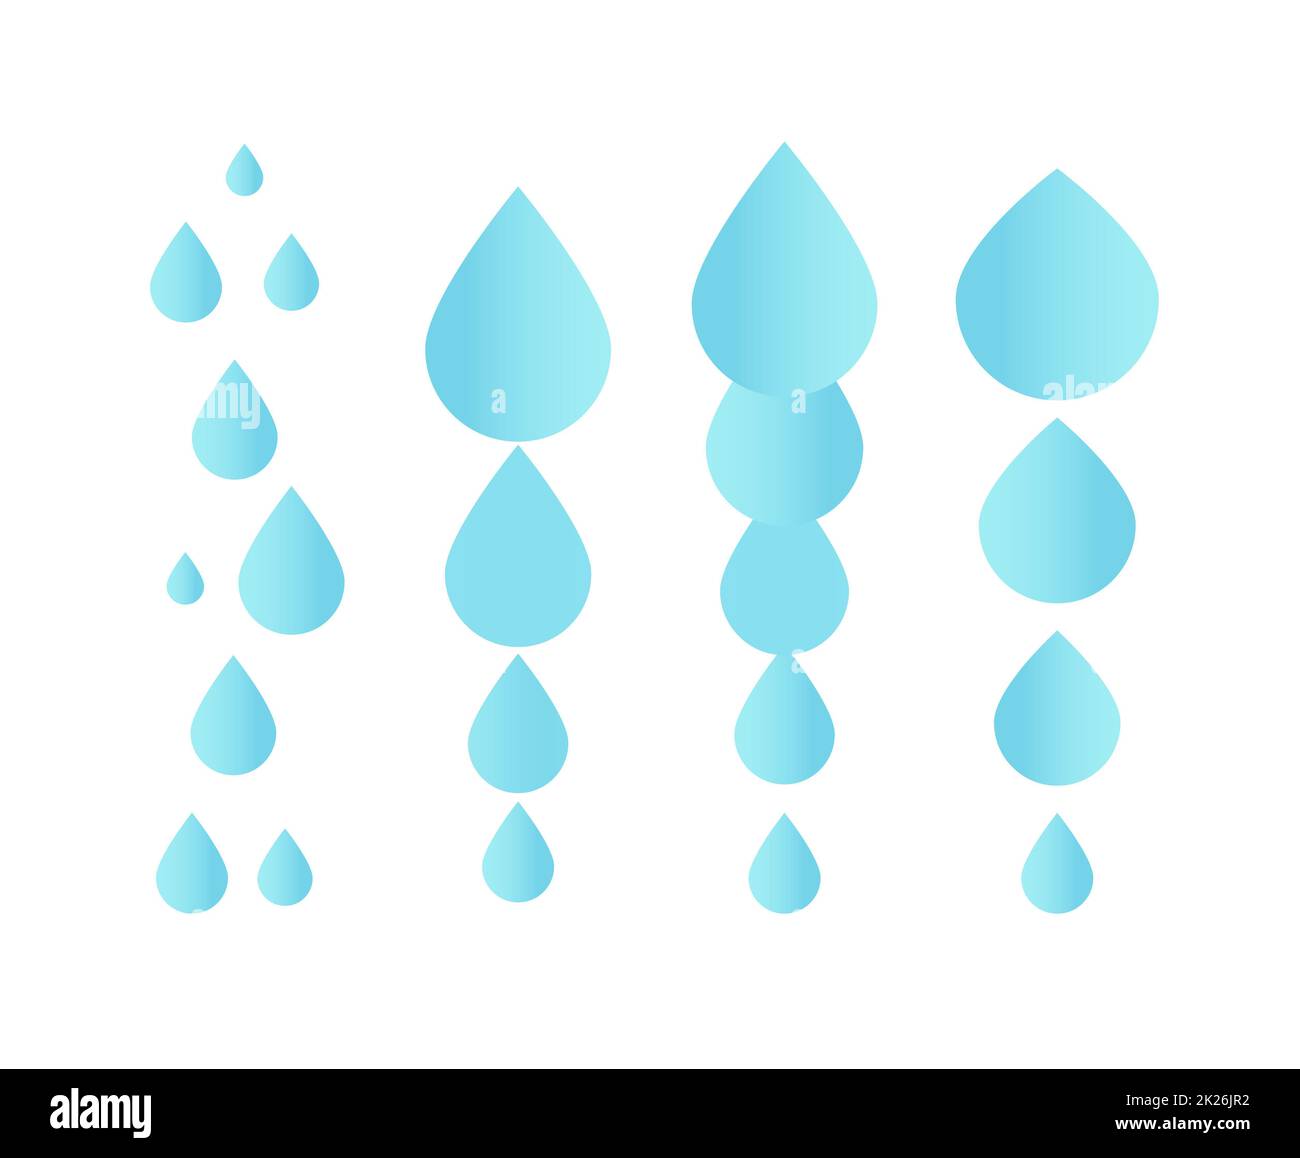 Falling water icon. Clean droplet logo template. Simple flat sign. Blue abstract symbol. Isolated vector illustration on white background. Stock Photo